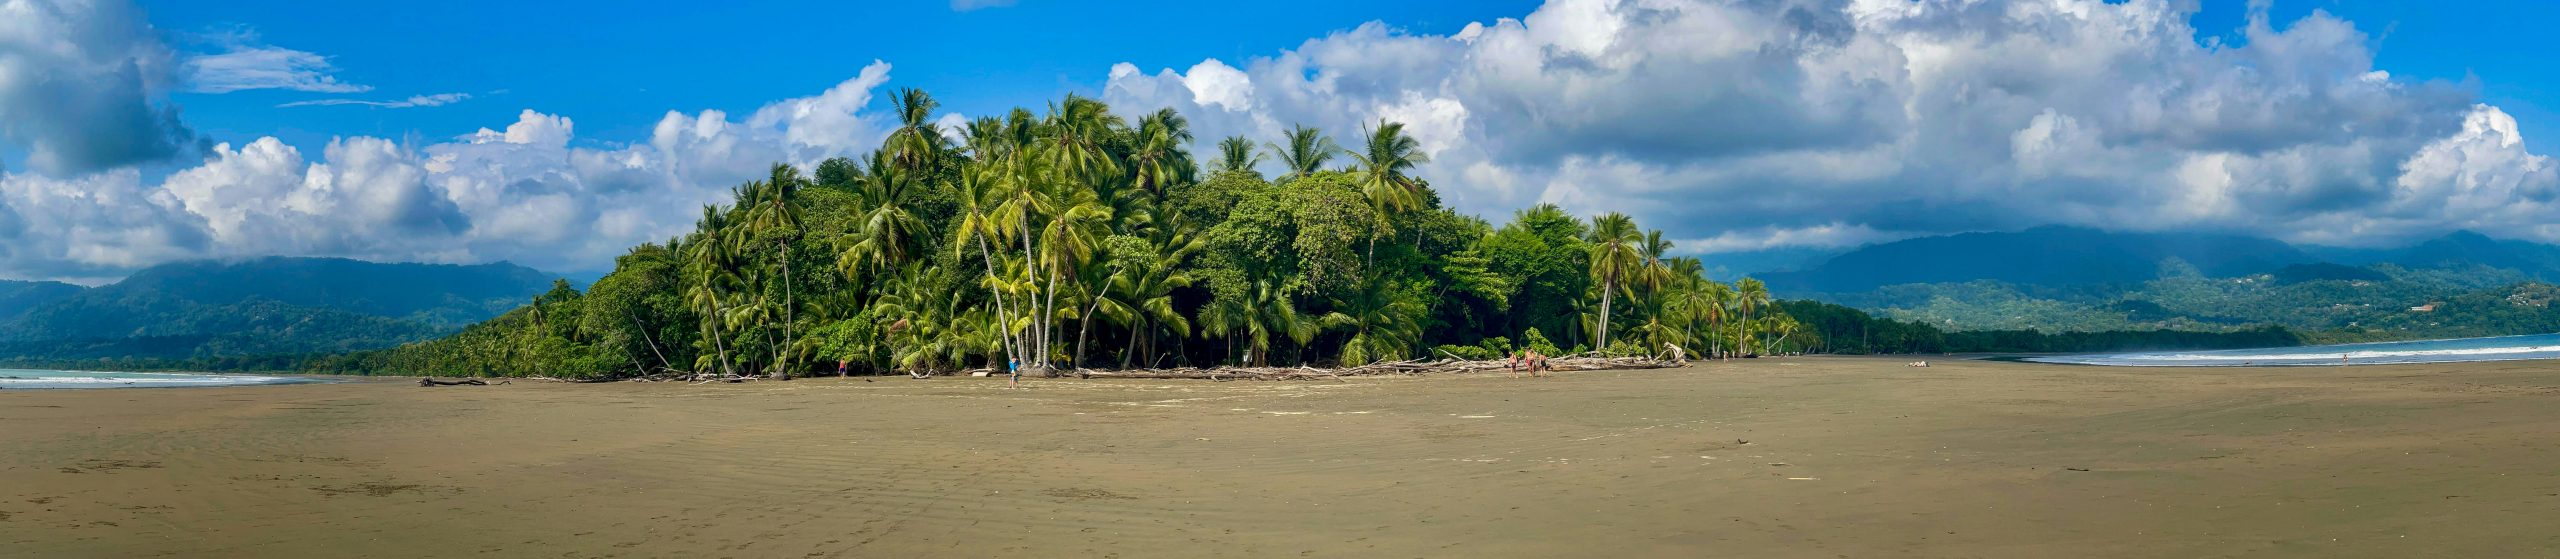 discover pristine and untouched beaches for the ultimate relaxation and natural beauty.